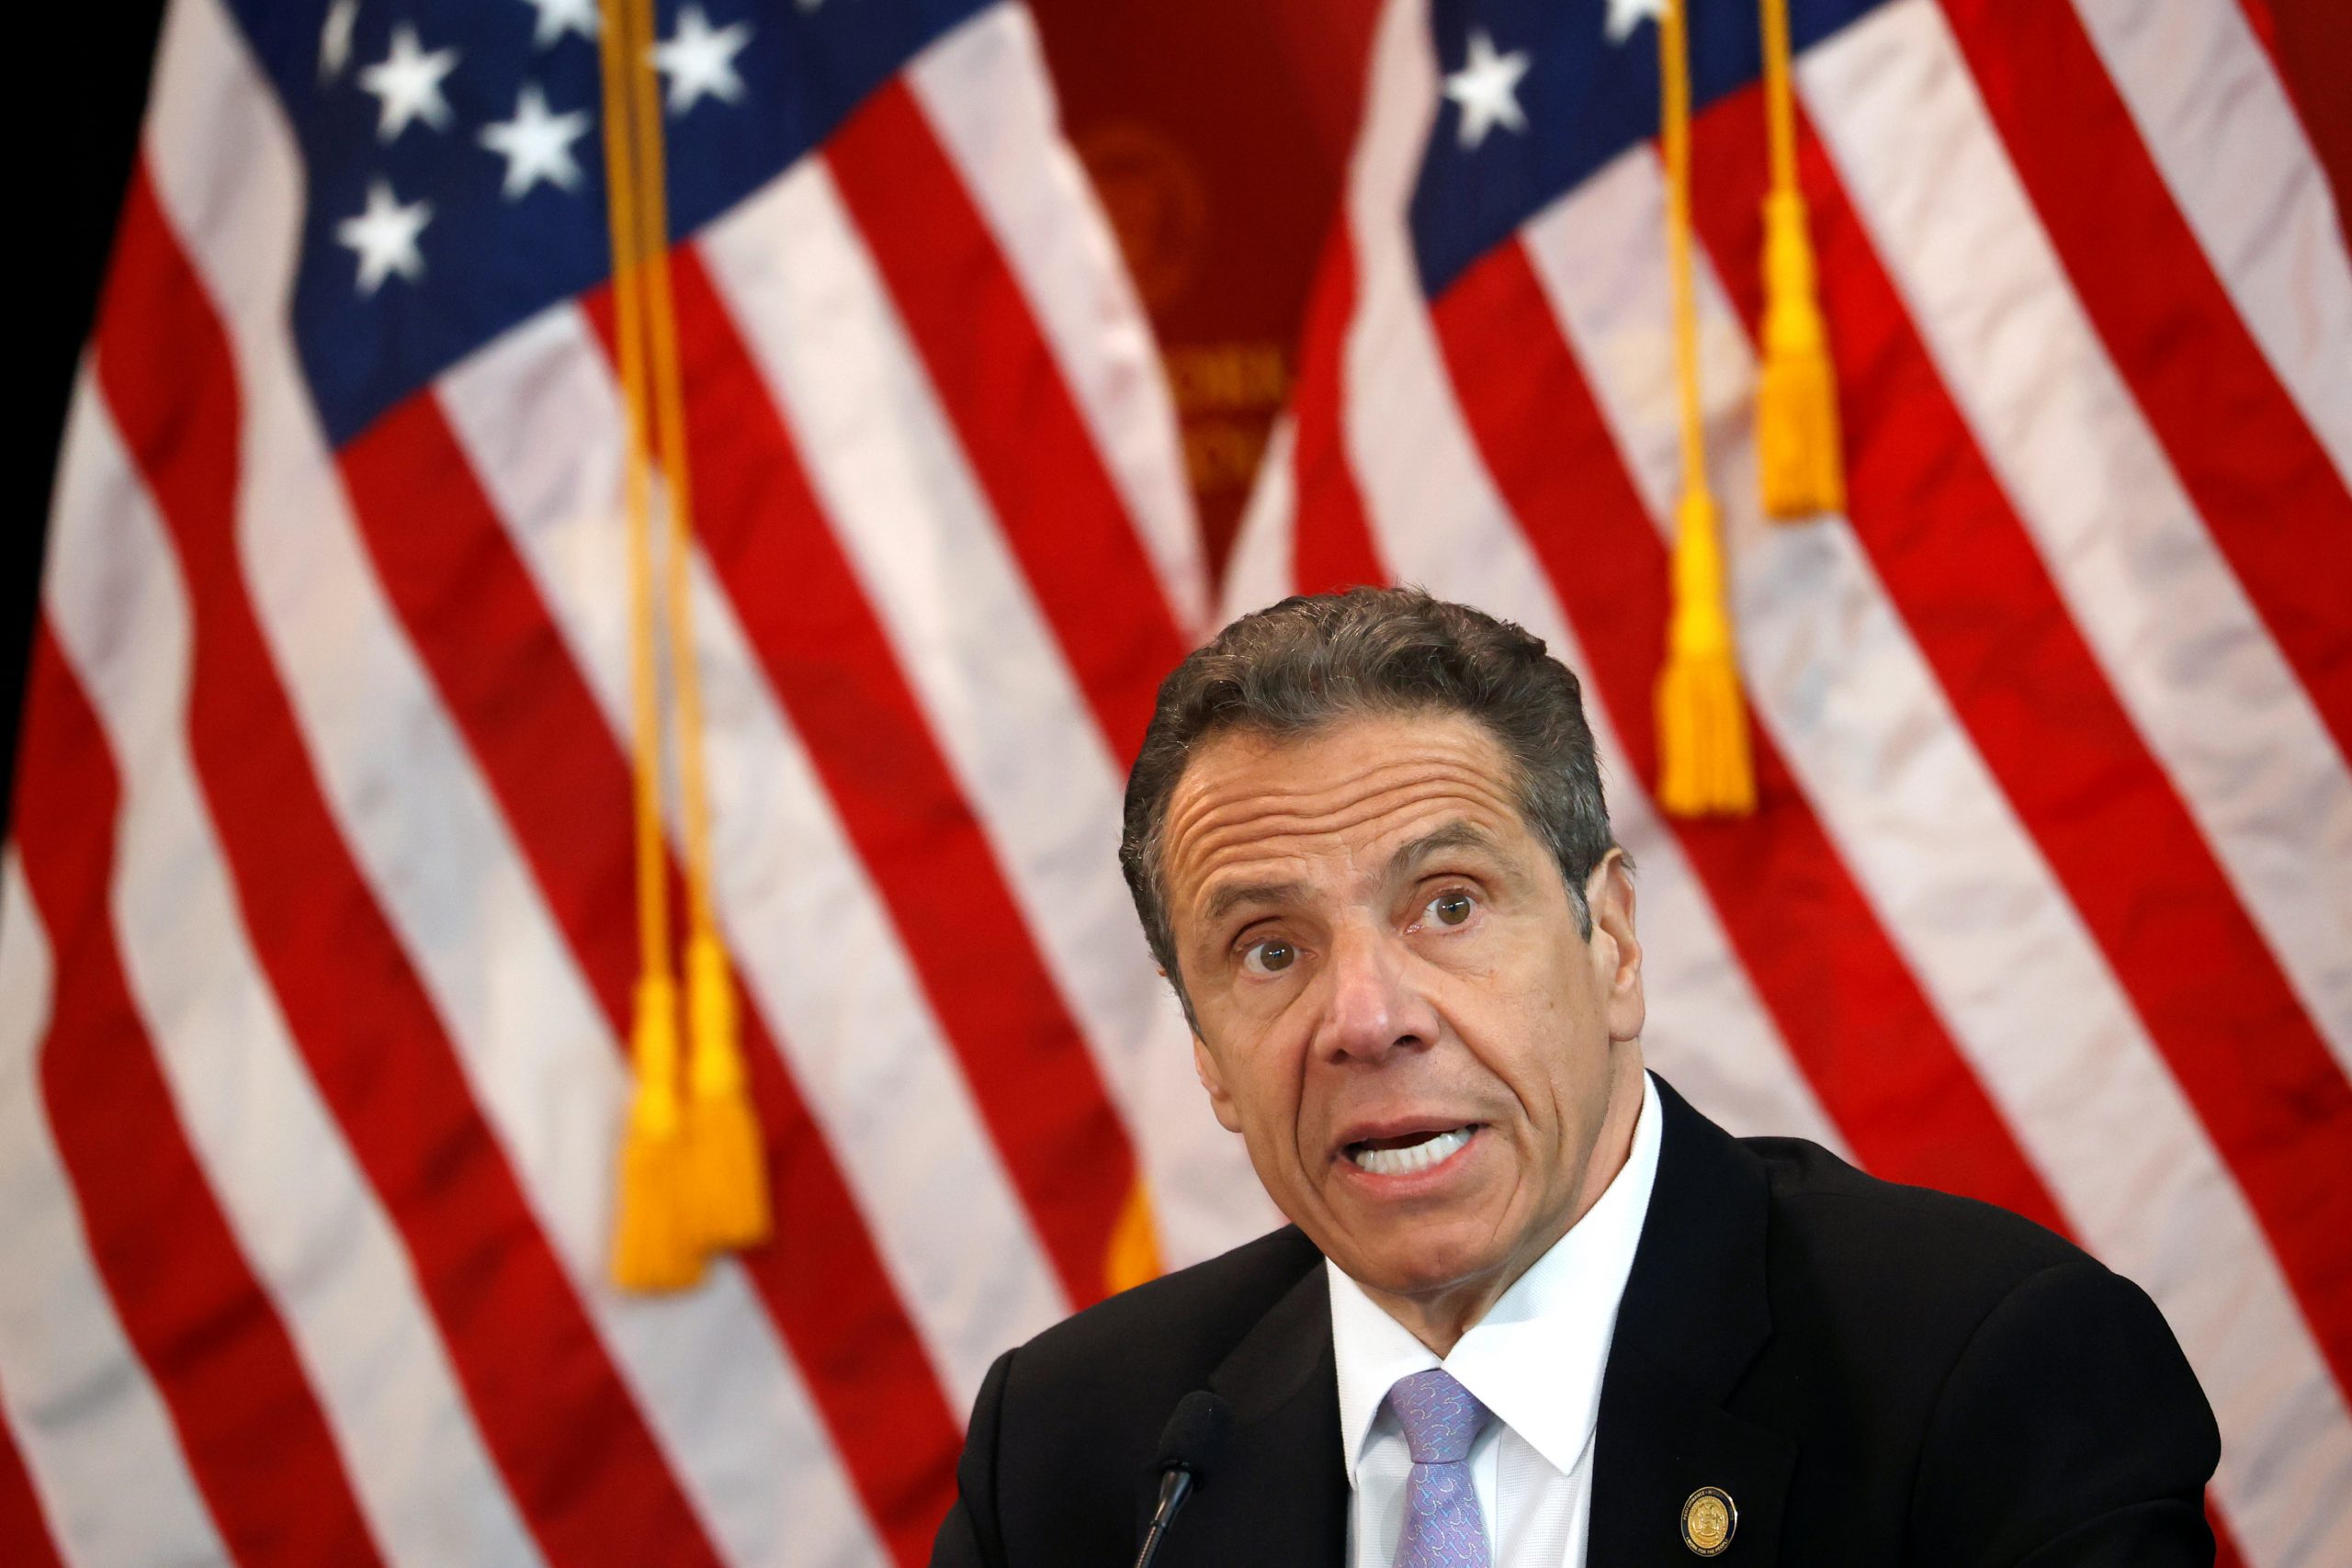 Mets and Yankees to hold spring training in NYC, Cuomo says